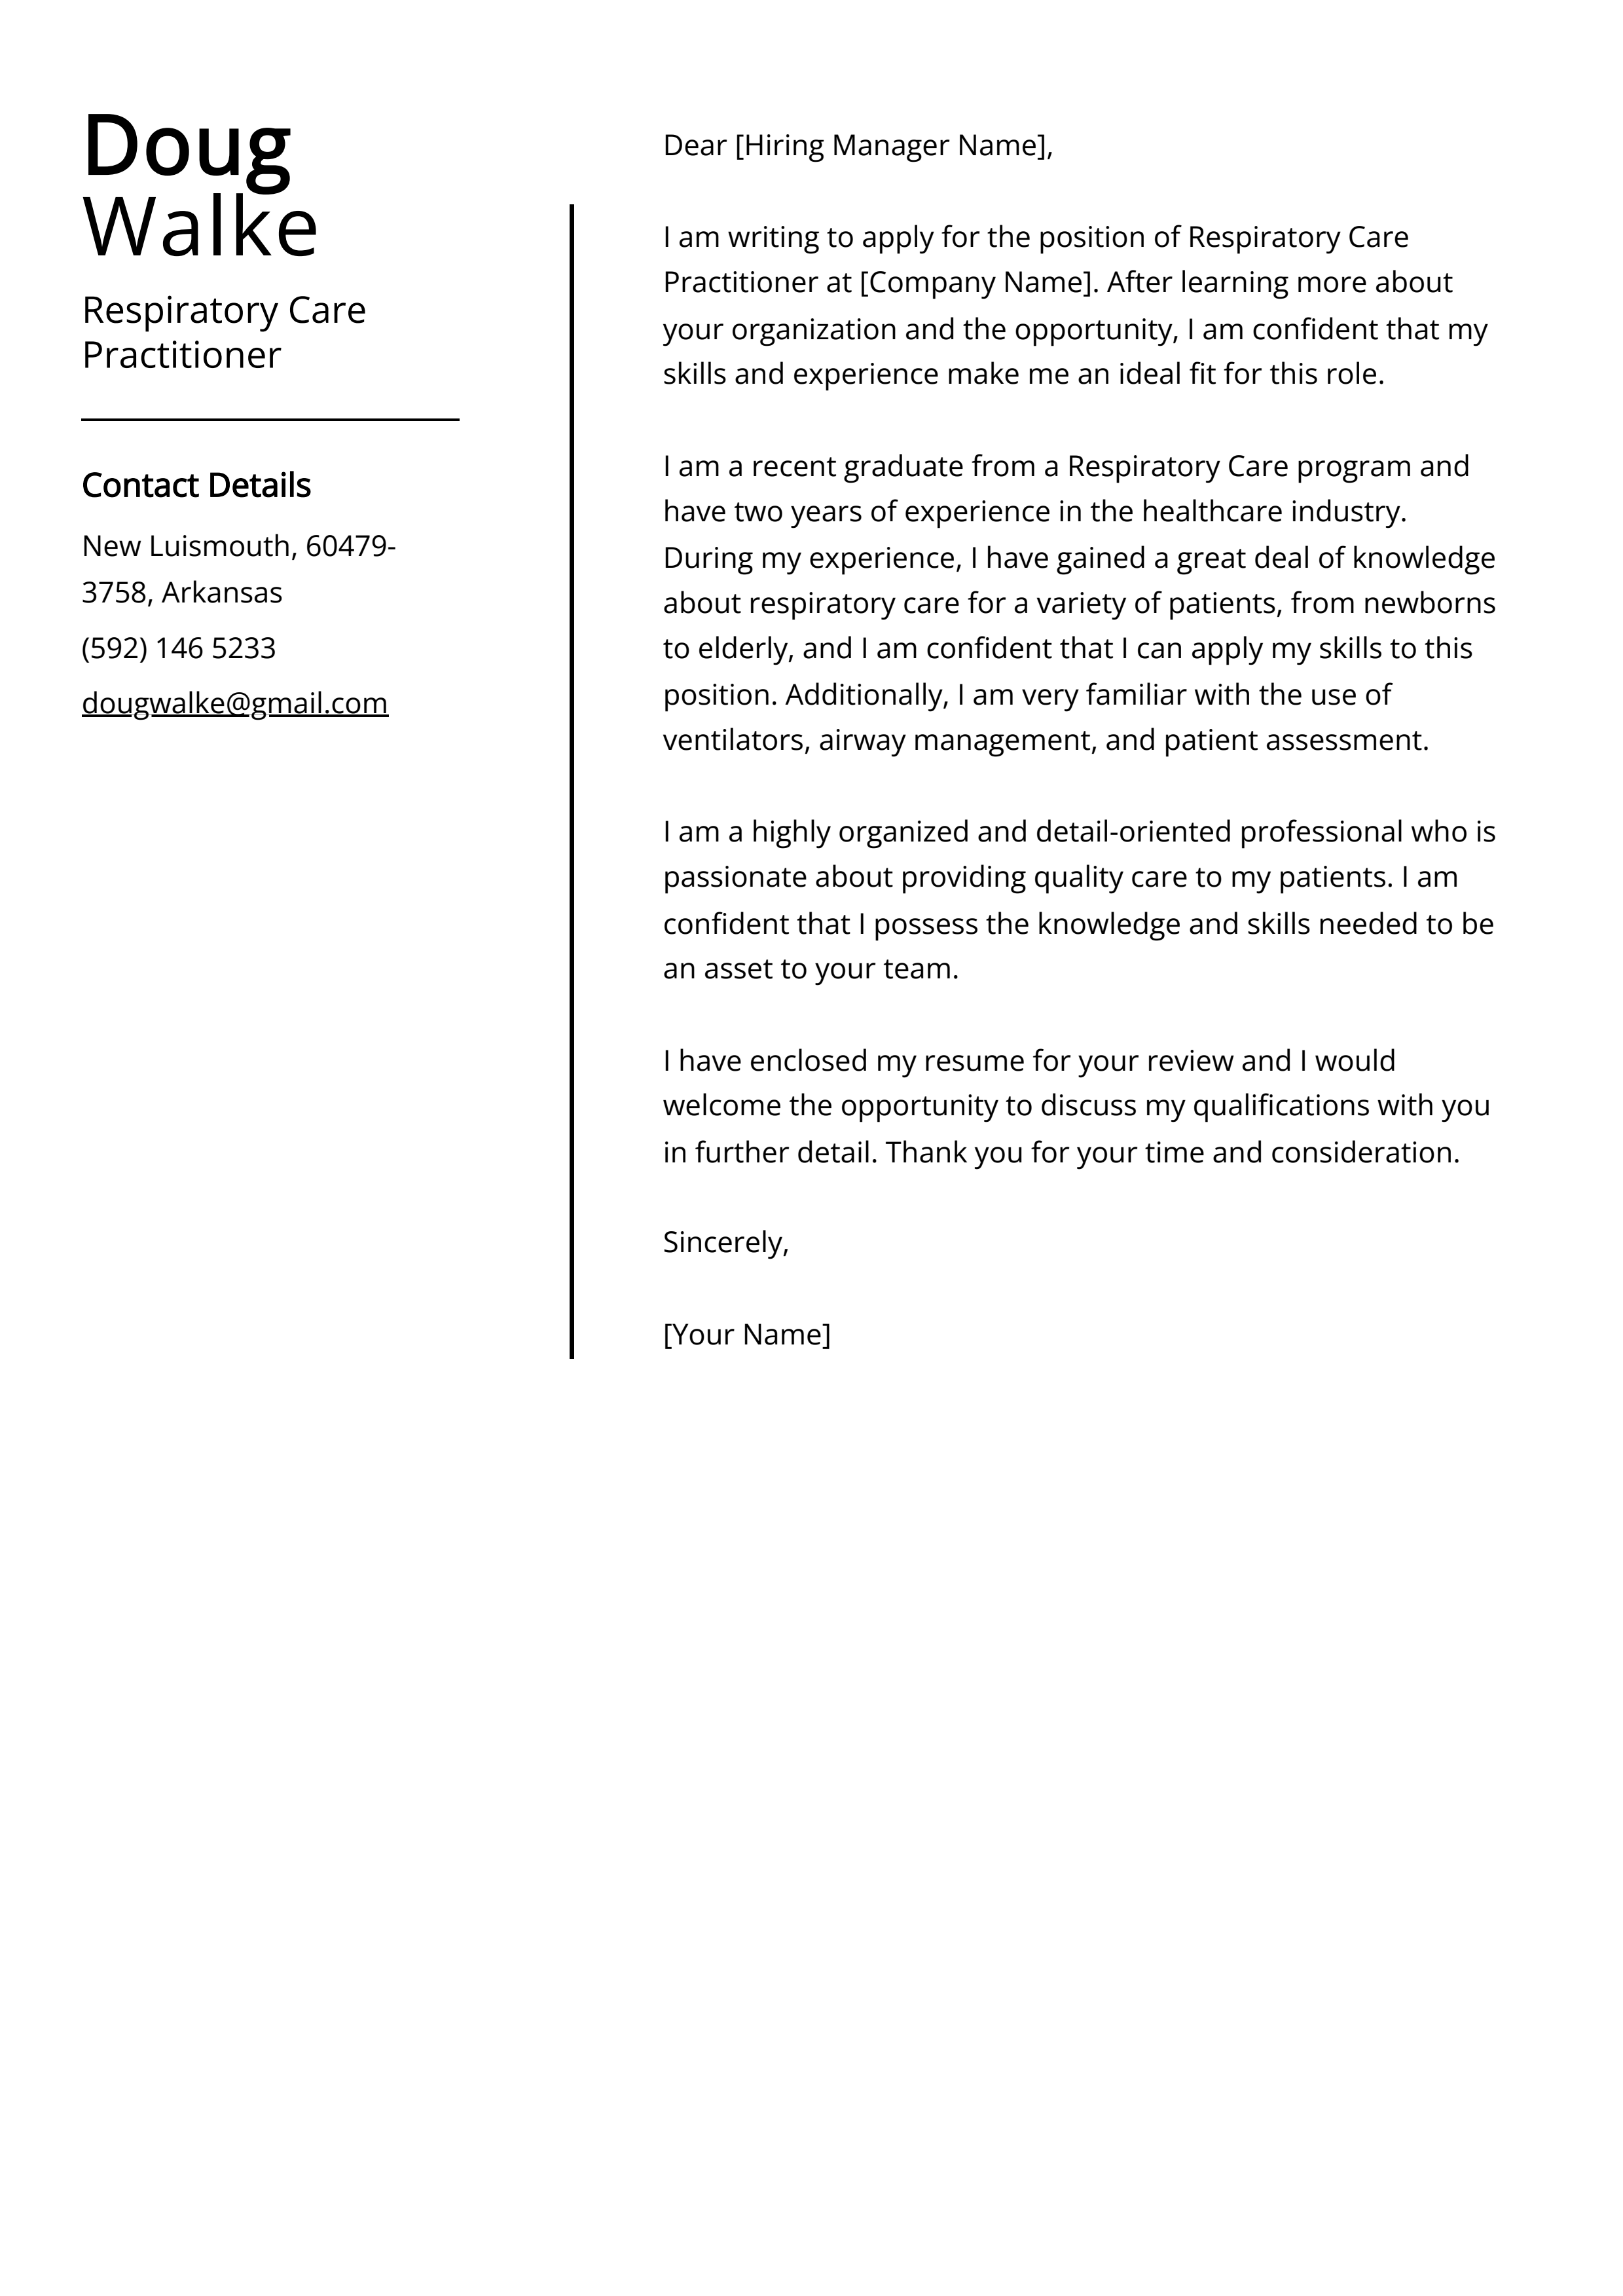 Respiratory Care Practitioner Cover Letter Example